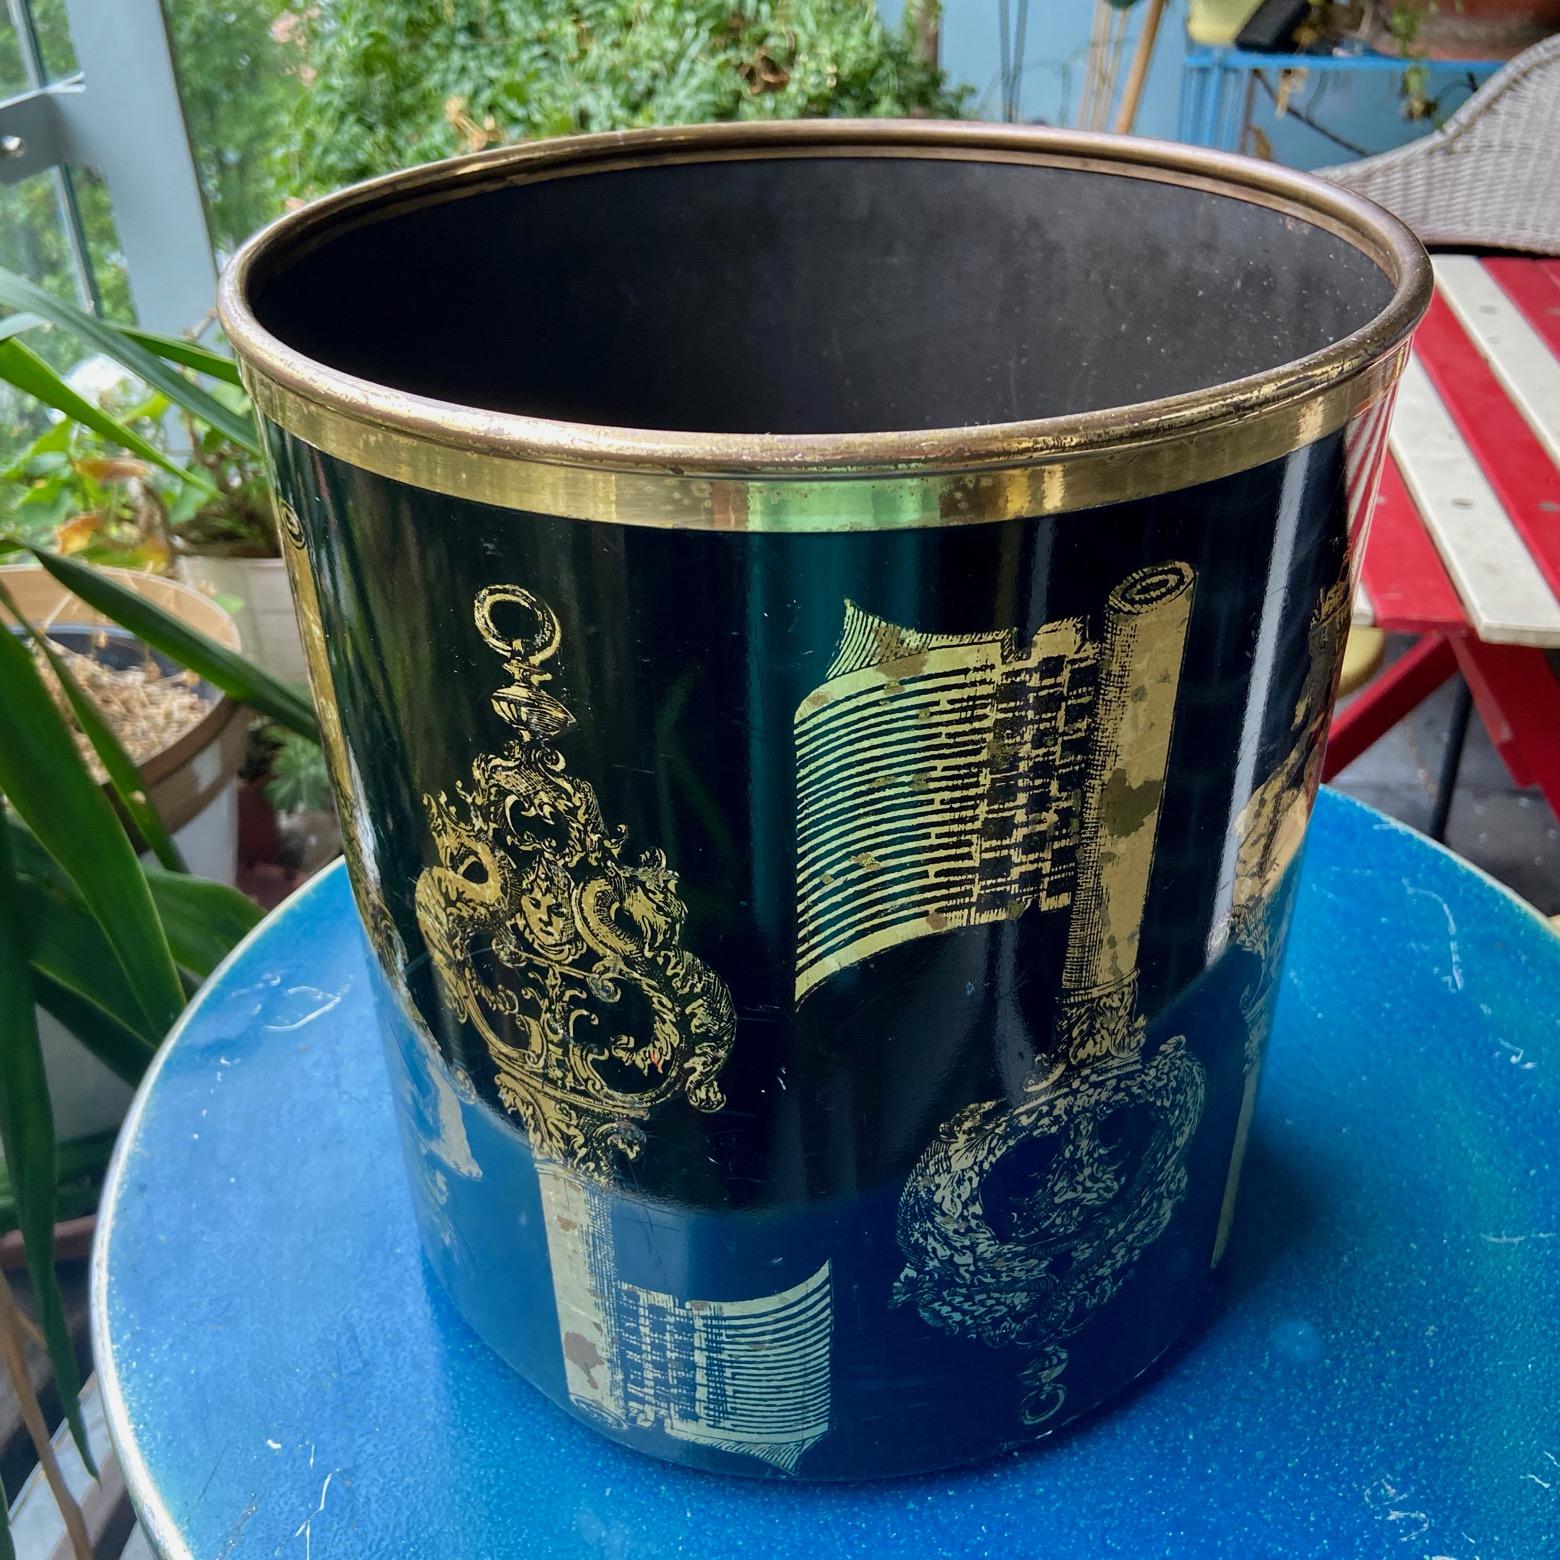 Piero Fornasetti 1950s Black and Gold Stencilled Key Design Paper Waste Basket For Sale 1